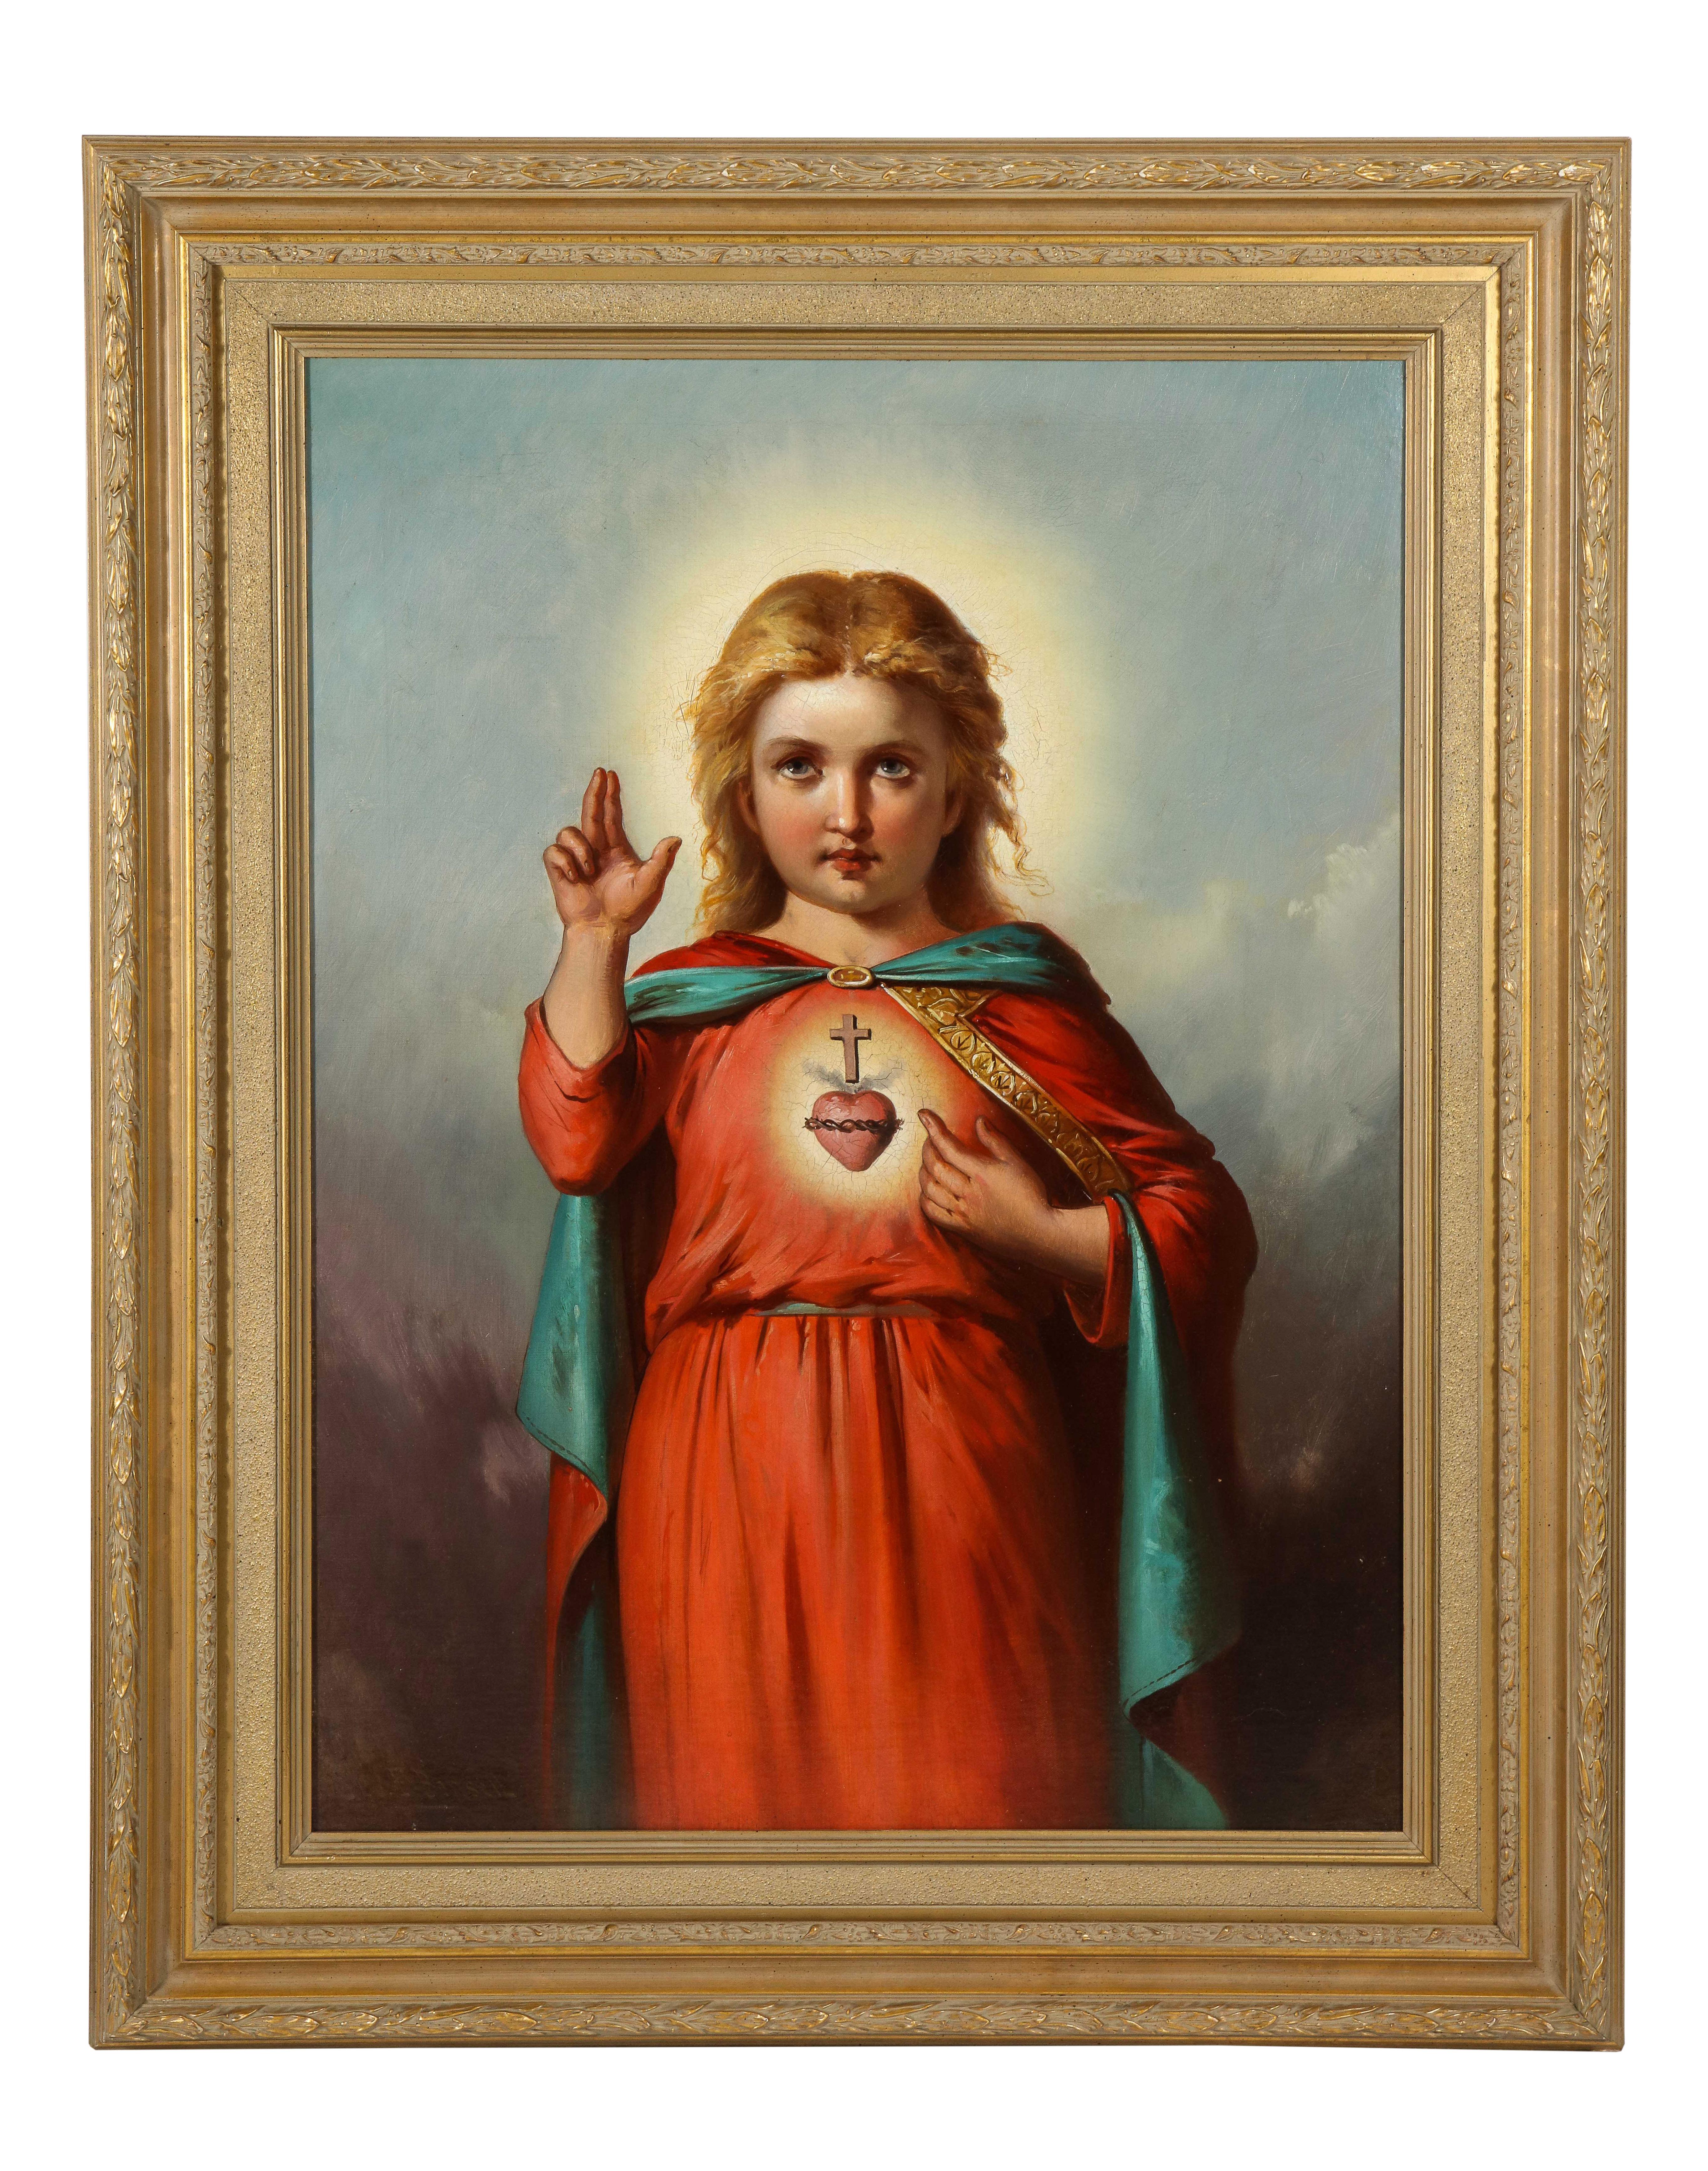 American School, (19th Century) Jesus Christ as A Baby Child, Oil Painting